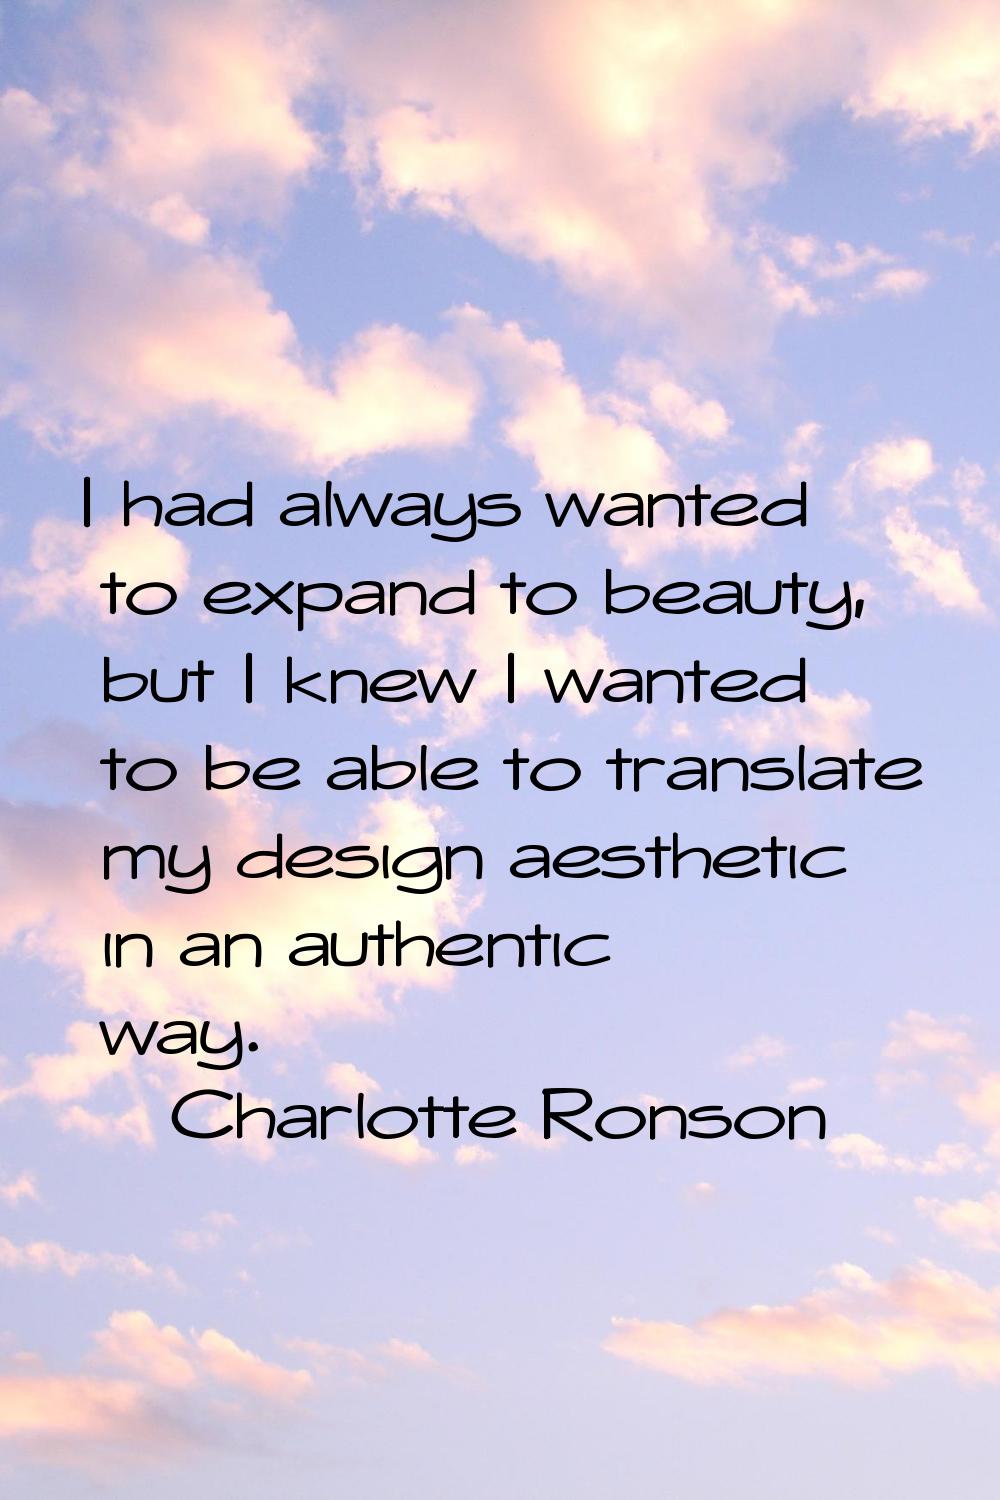 I had always wanted to expand to beauty, but I knew I wanted to be able to translate my design aest